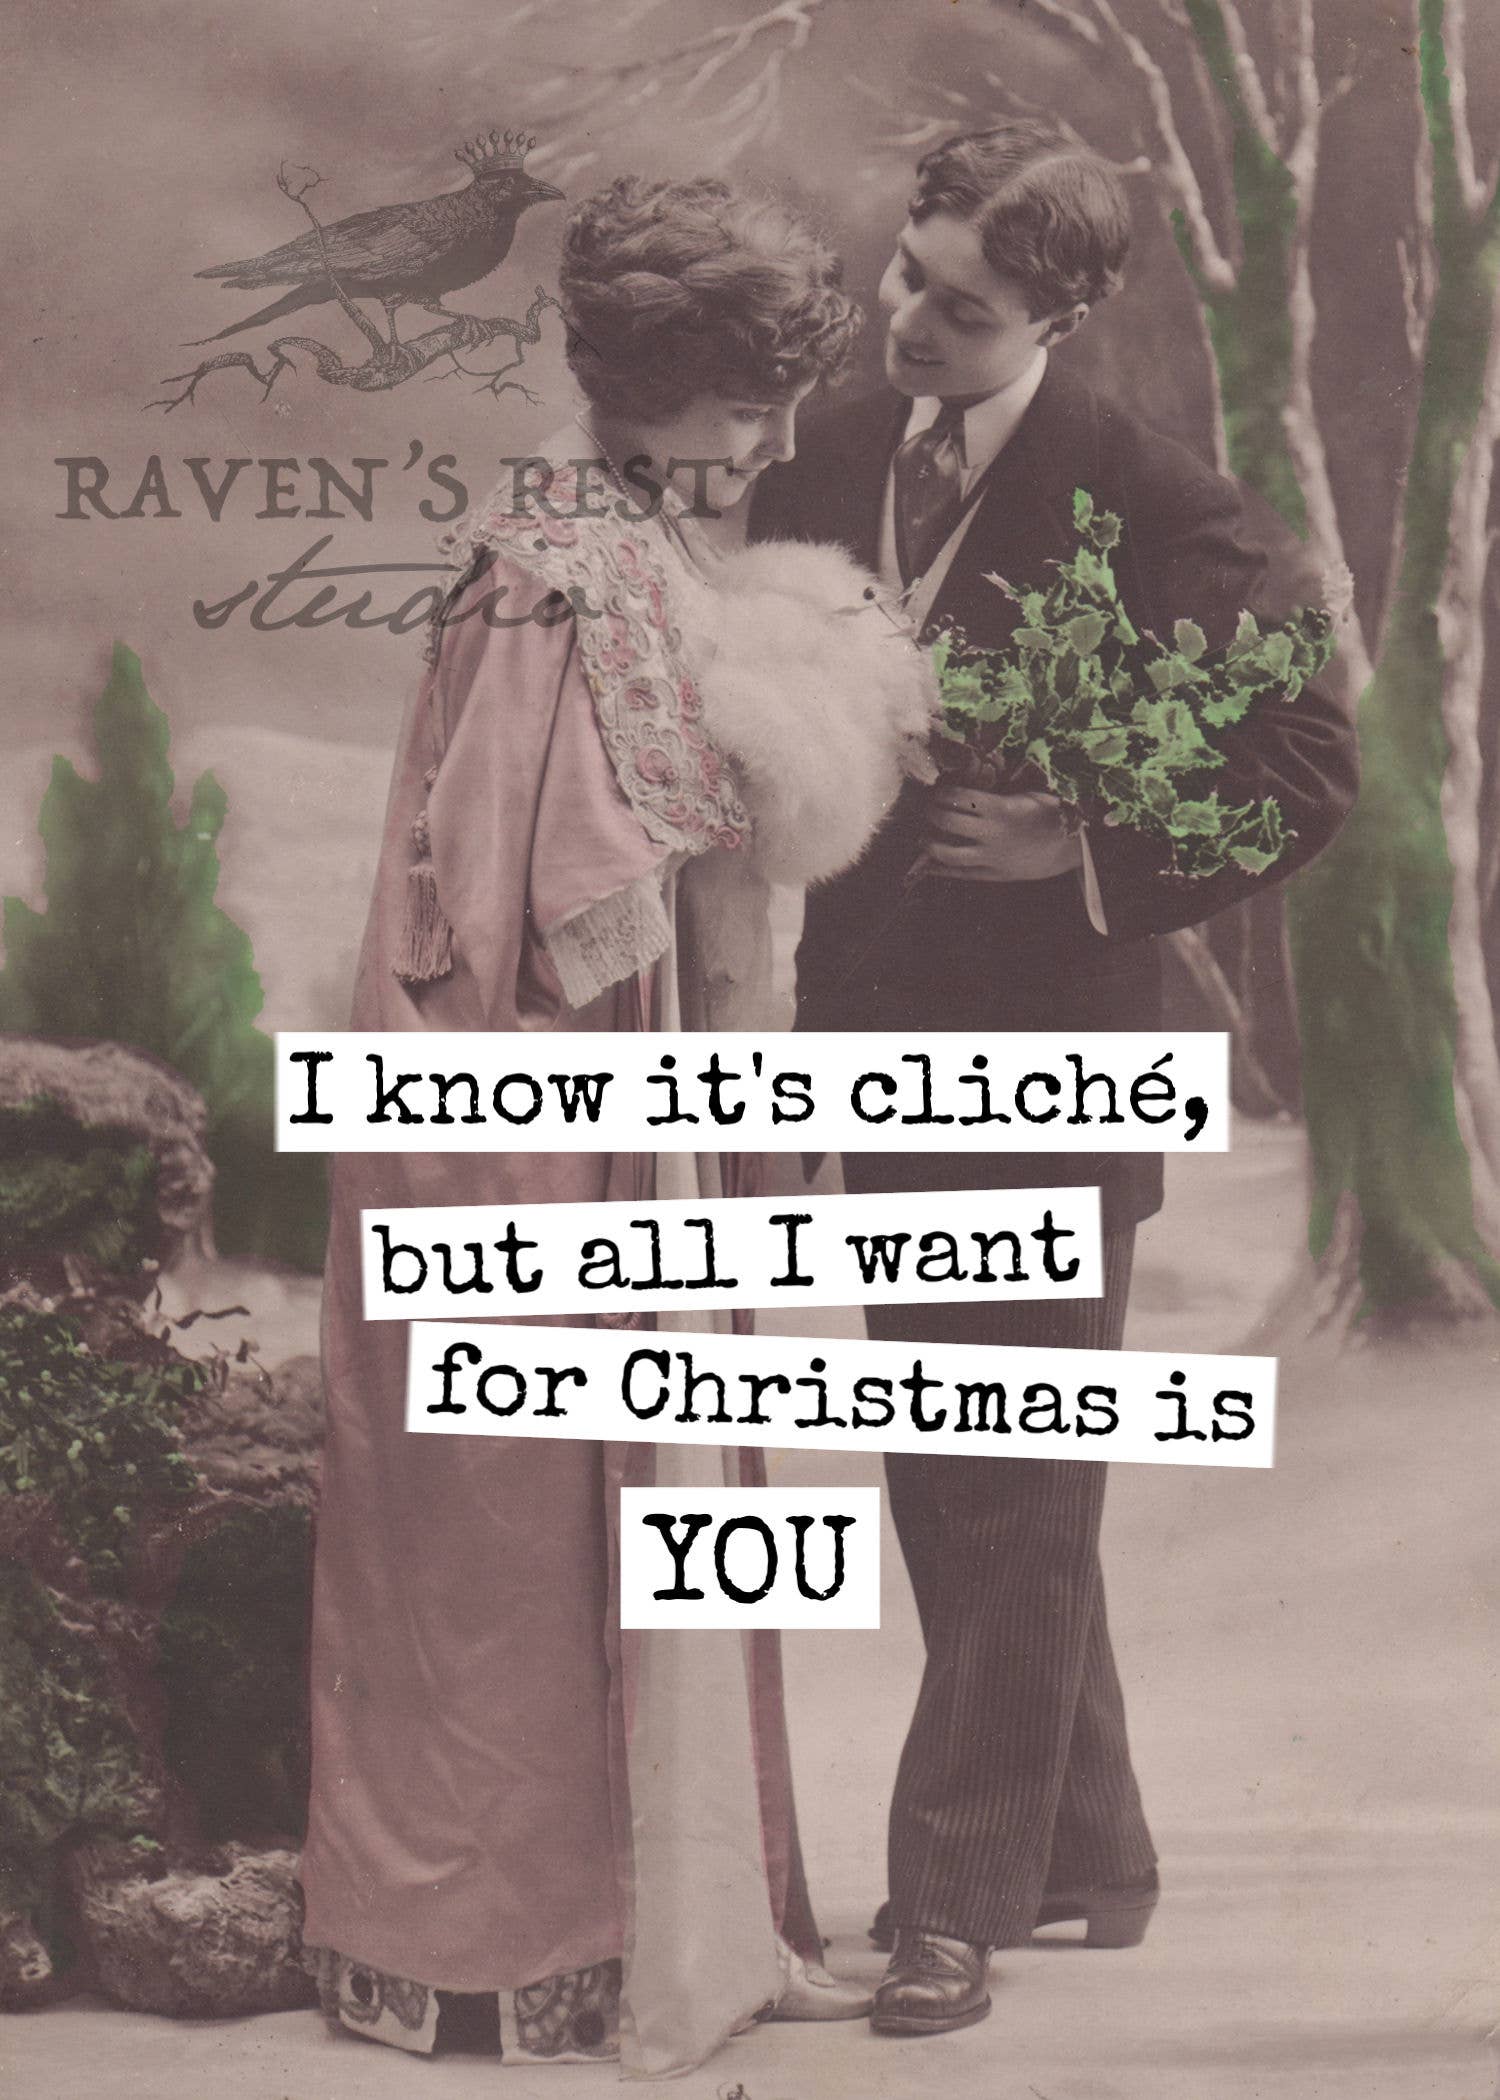 I Know It's Cliche, But All I Want For Christmas Is YOU.